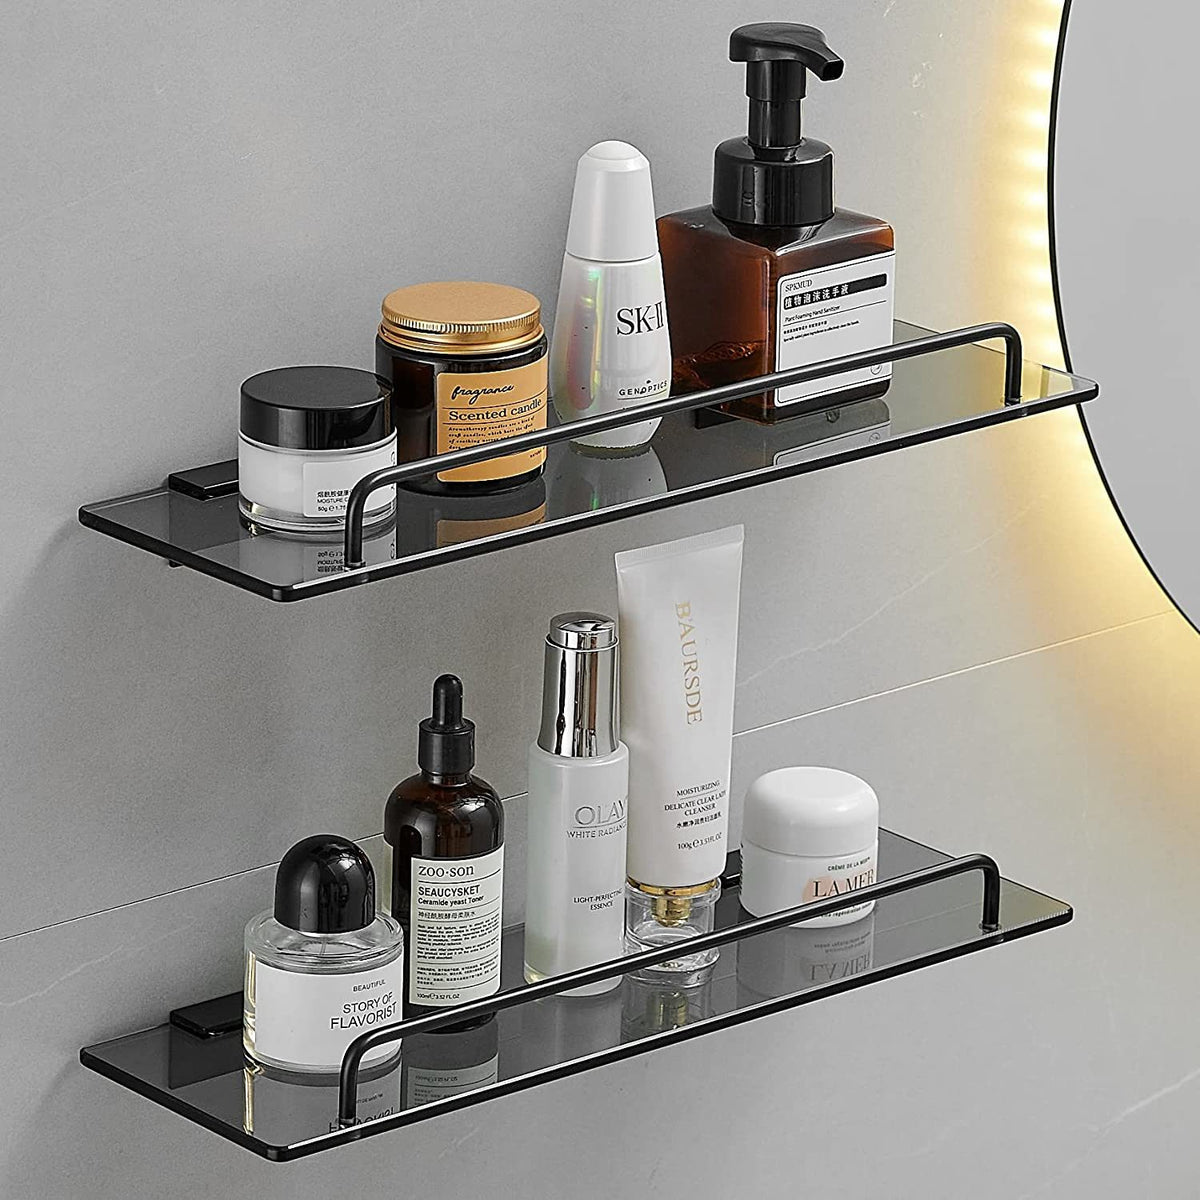 Wall Mounted Glass Shelf for Bathroom with Rail Floating Shelves